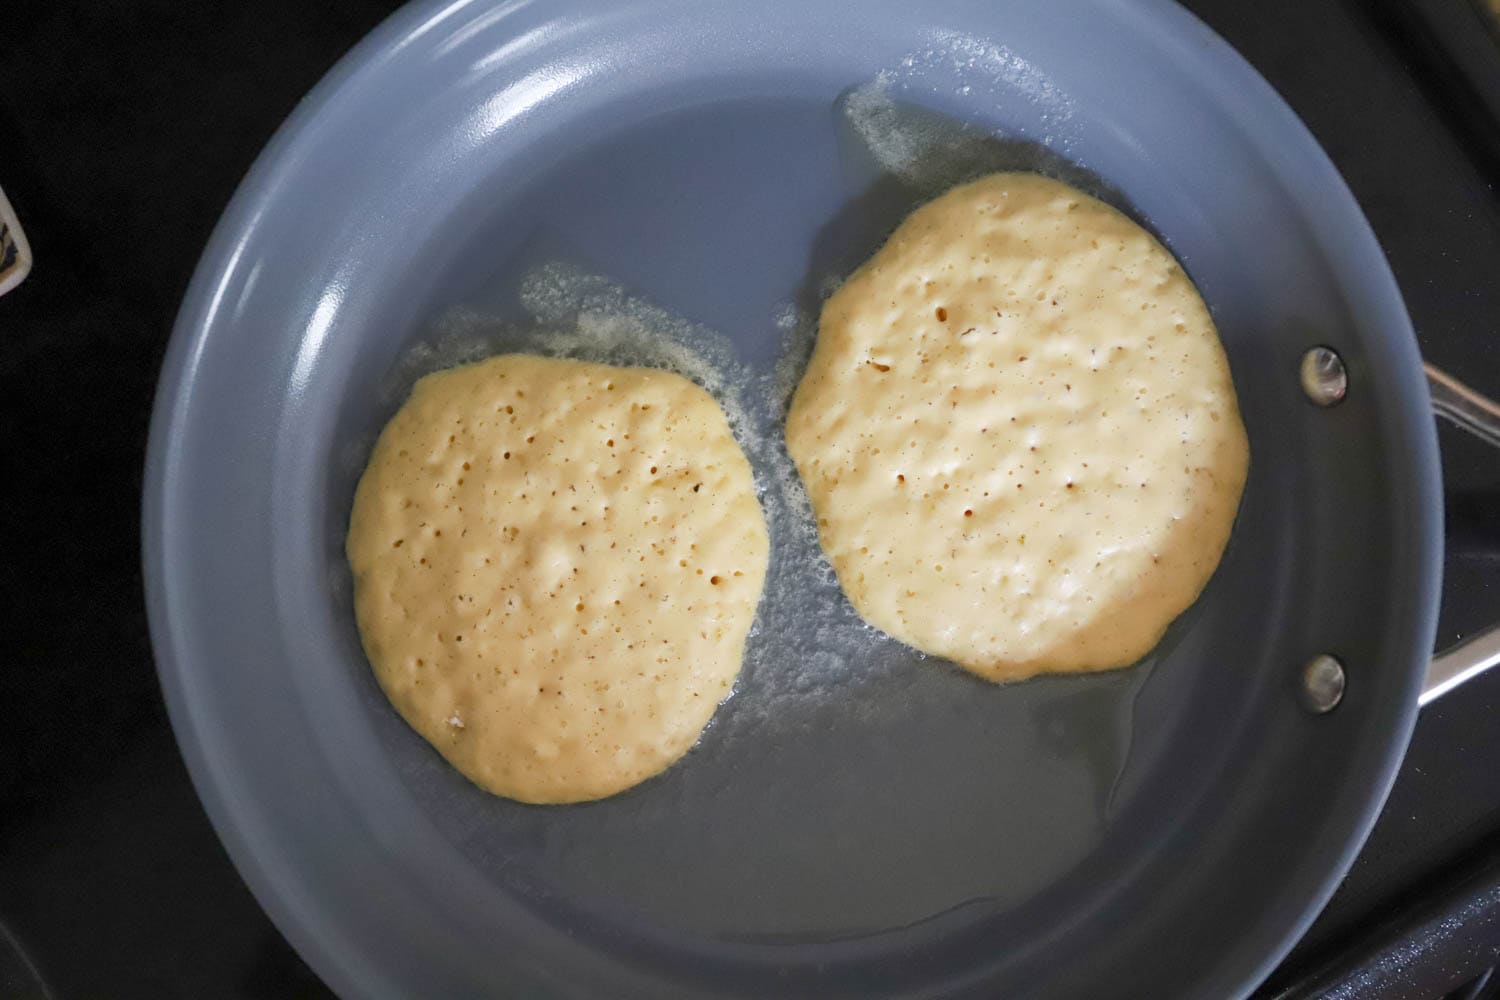 Two pancakes cooking in butter on a nonstick blue pan.